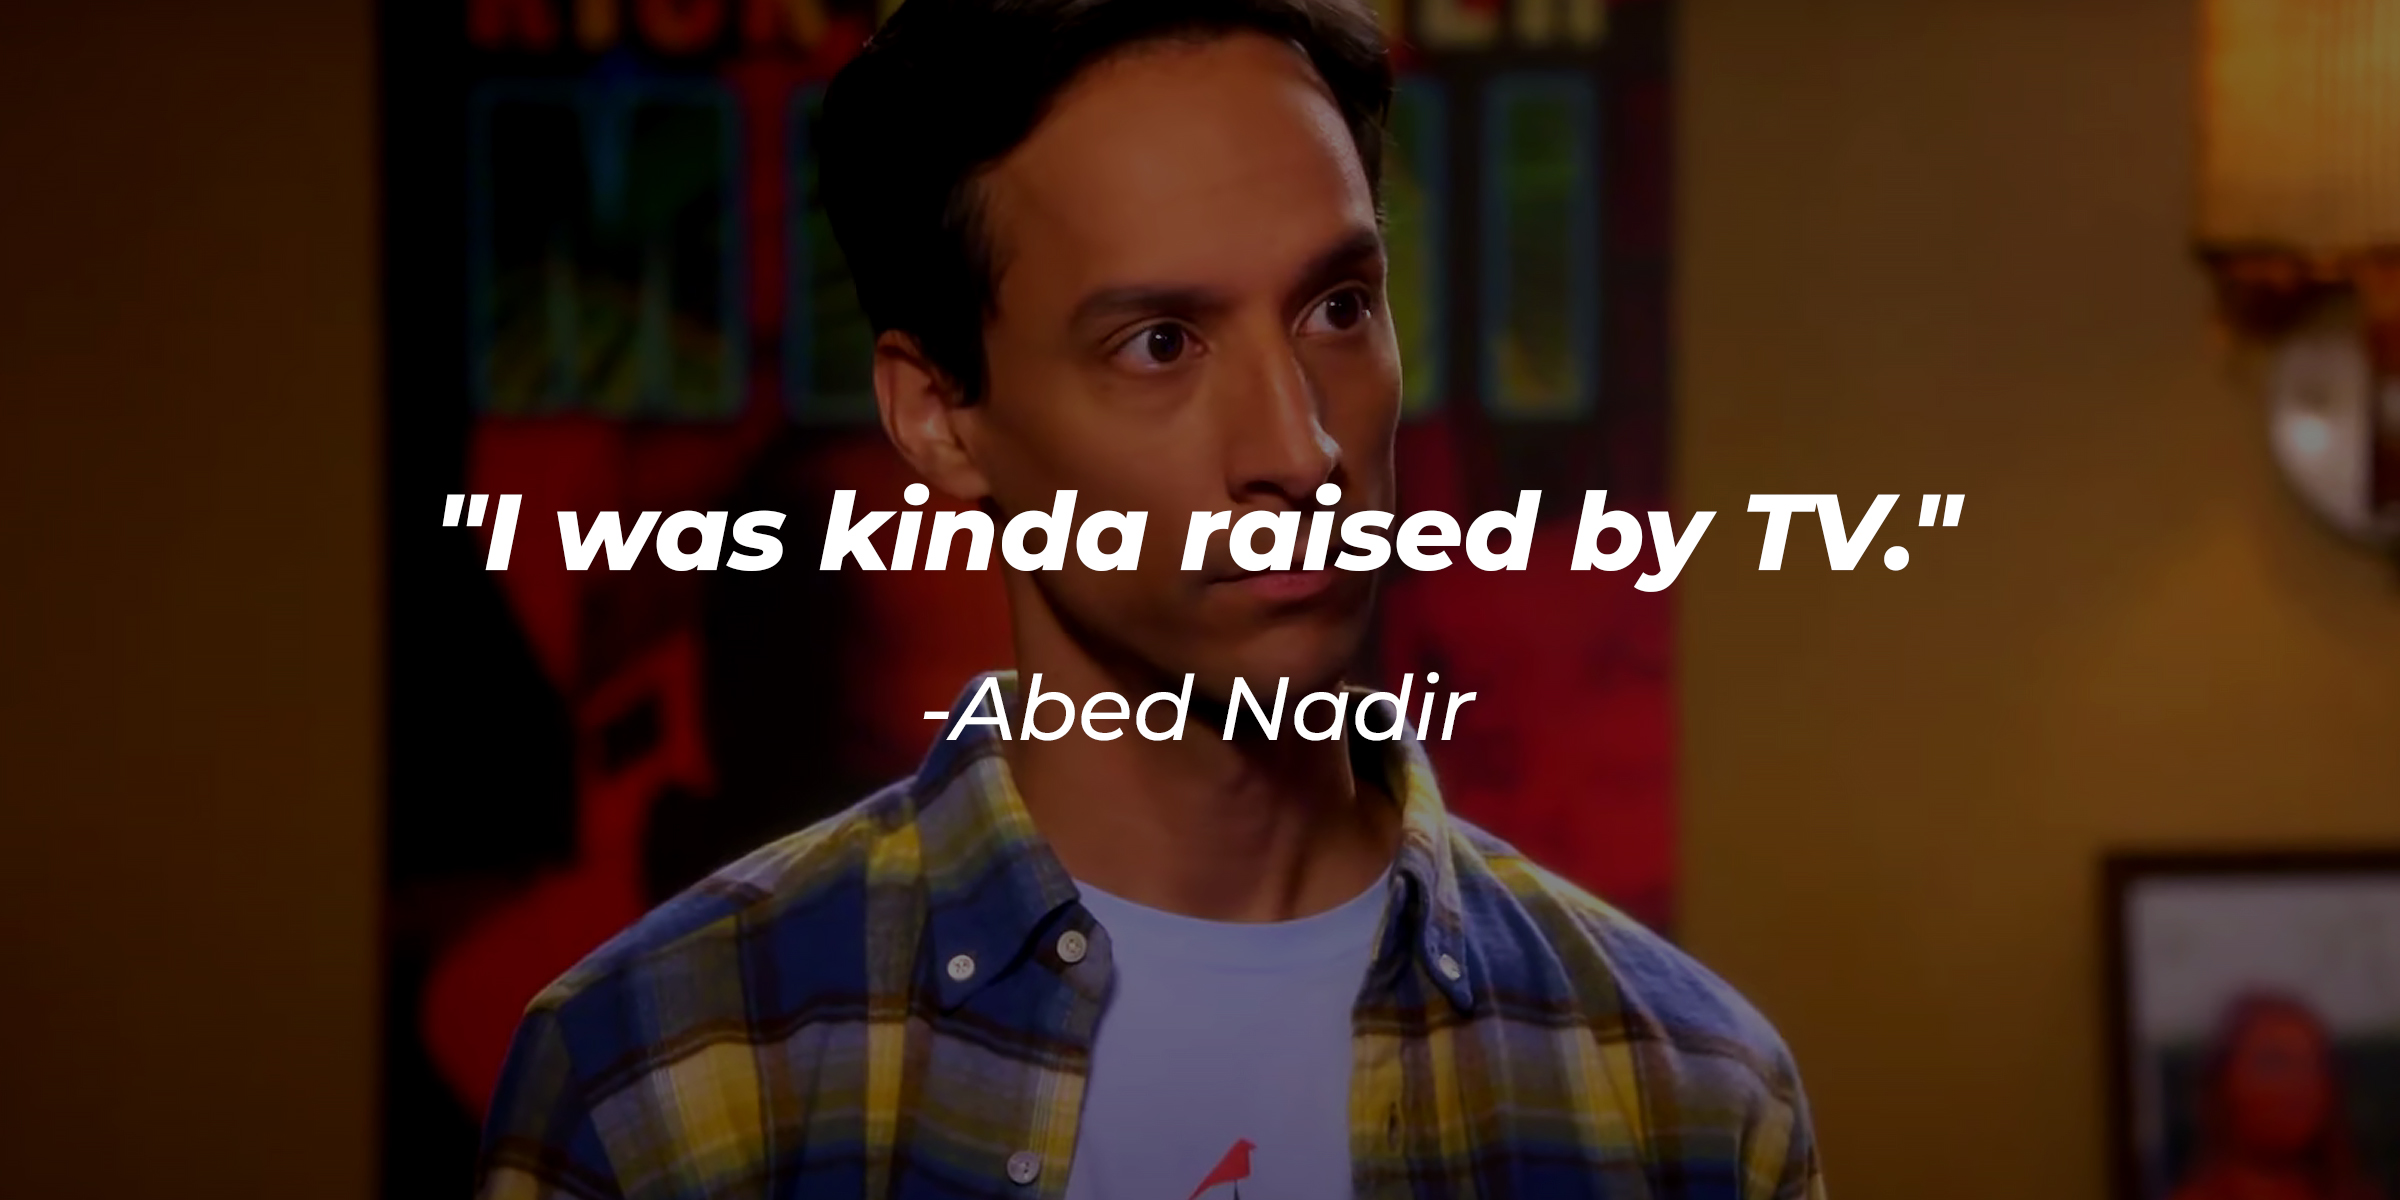 Abed Nadir, with his quote: "I was kinda raised by TV." | Source: Youtube.com/CommunityOfficialChannel